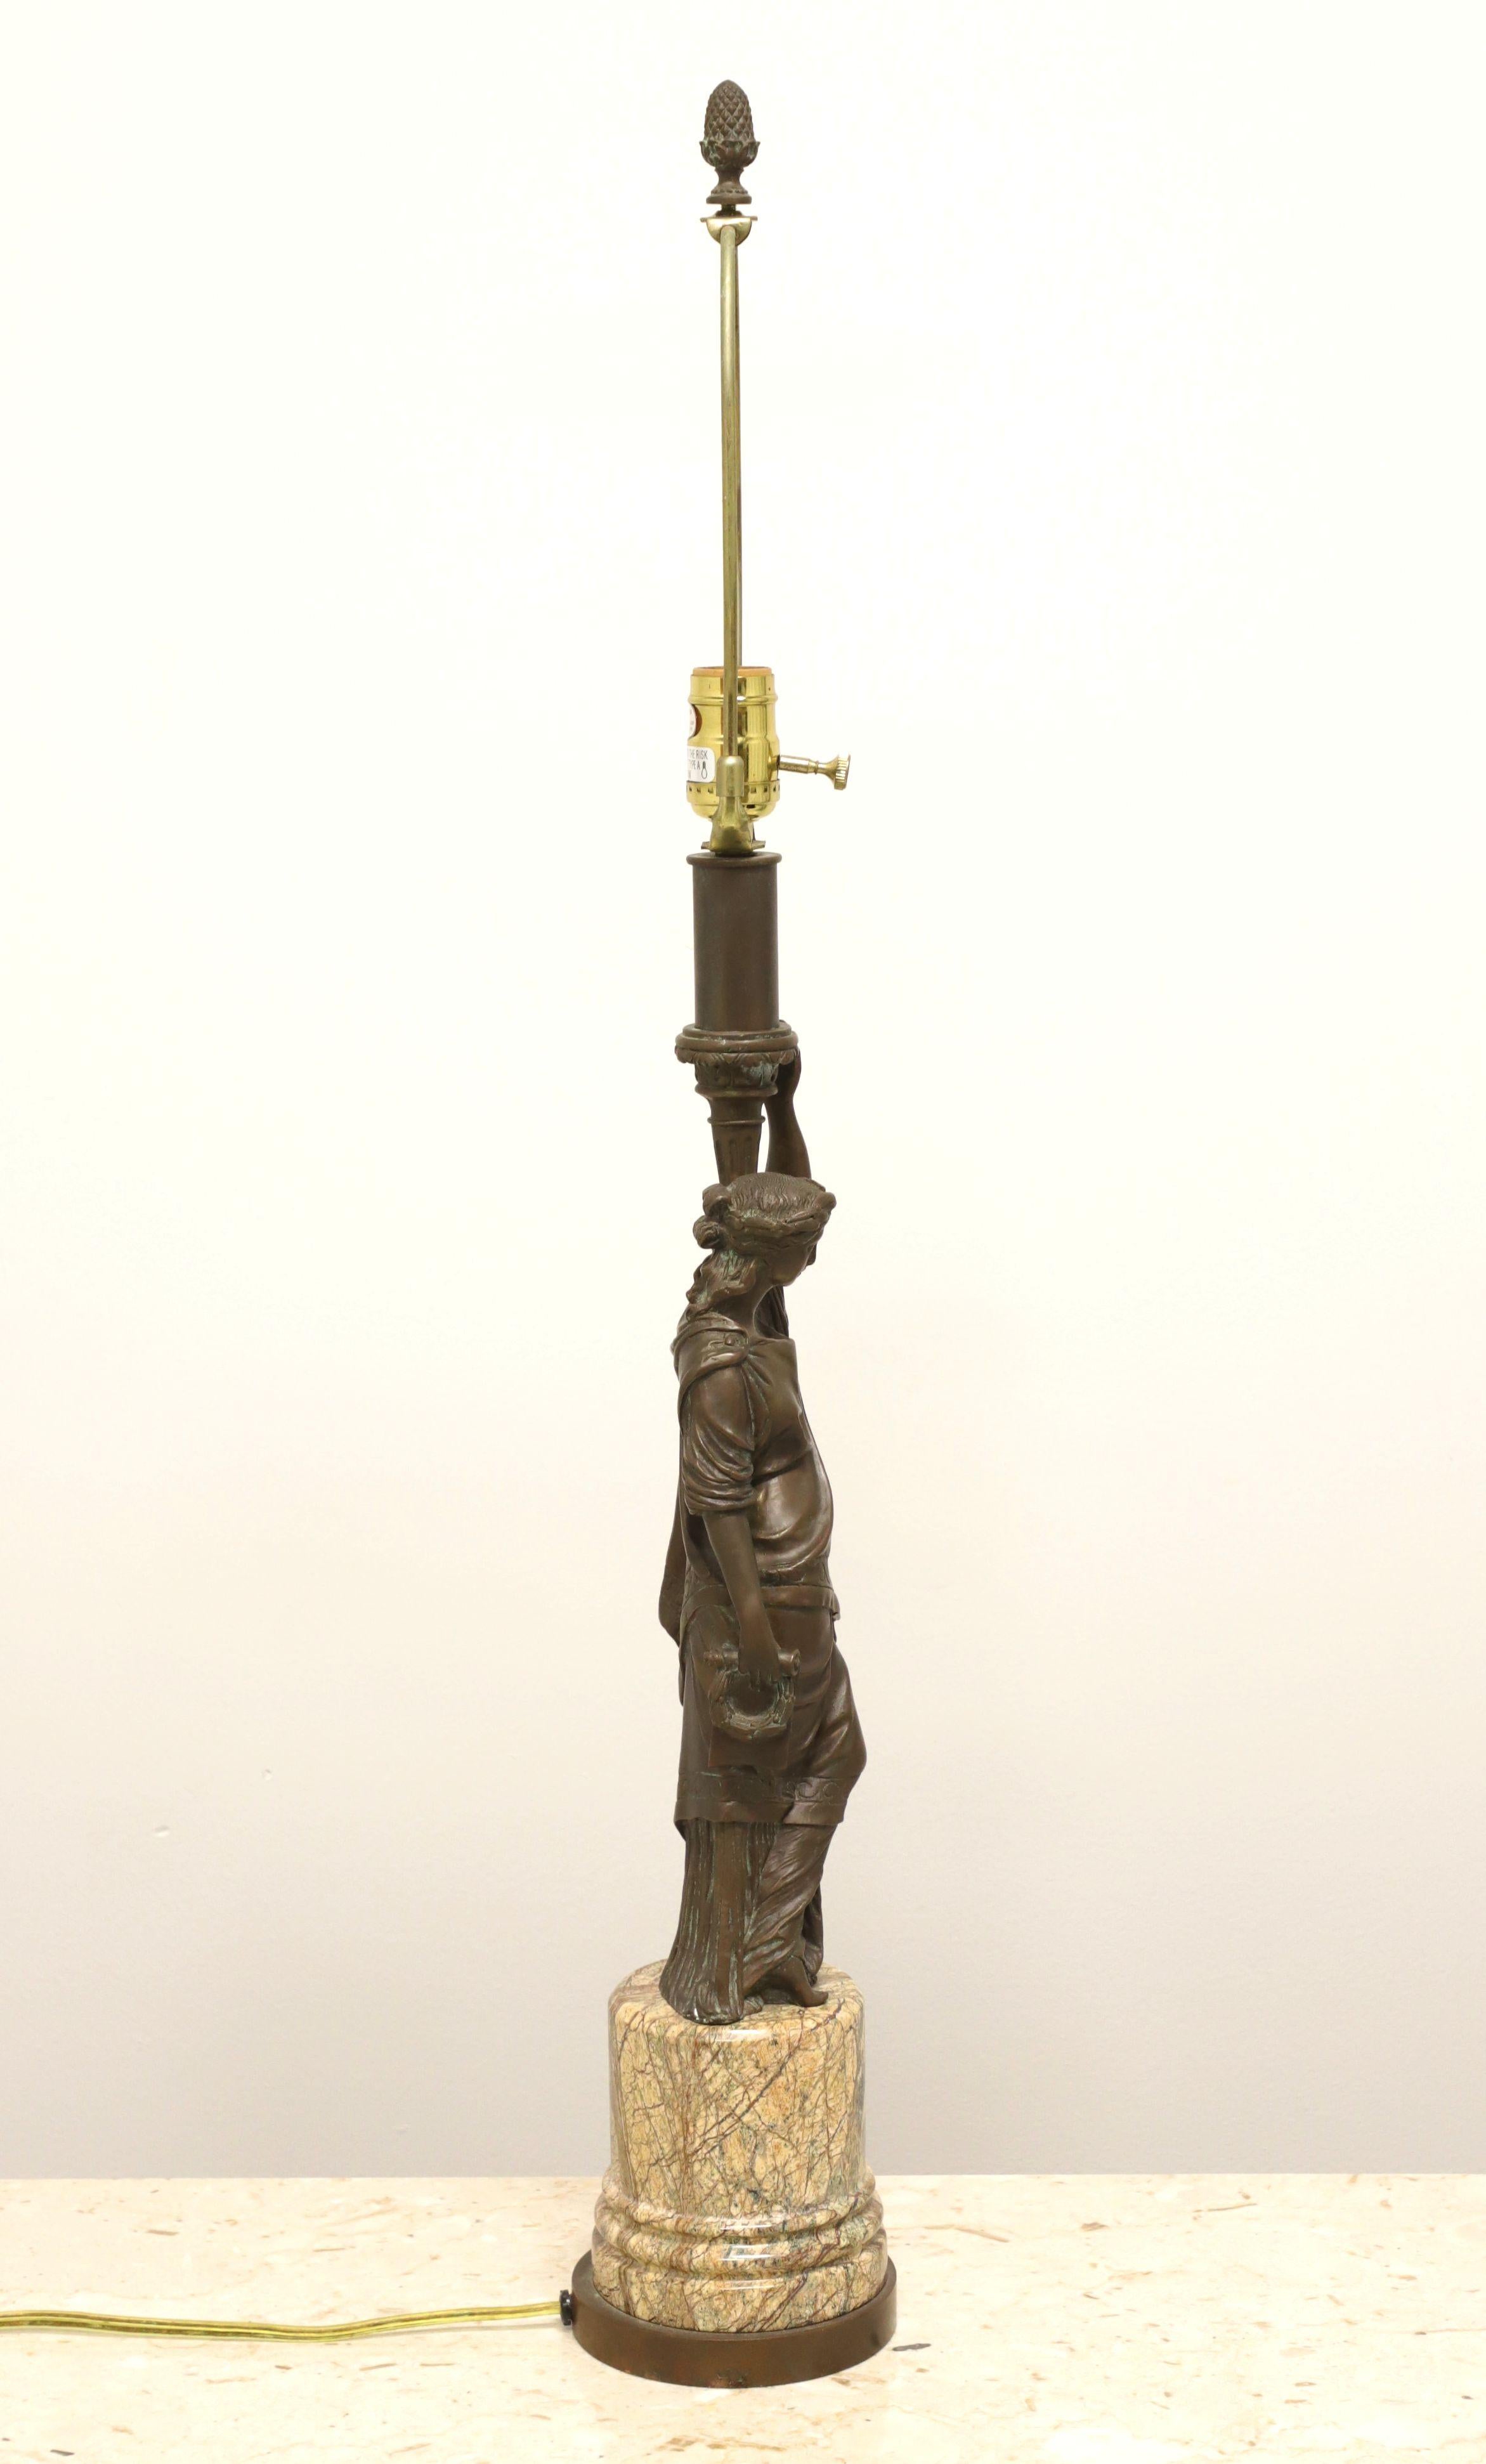 A Romanesque style statue formed as a table lamp, unbranded. Bronze statue of a woman holding a candle urn set onto a marble & bronze base. Single standard bulb socket with 3-way knob switch, brass harp and bronze pineapple finial. Likely made in